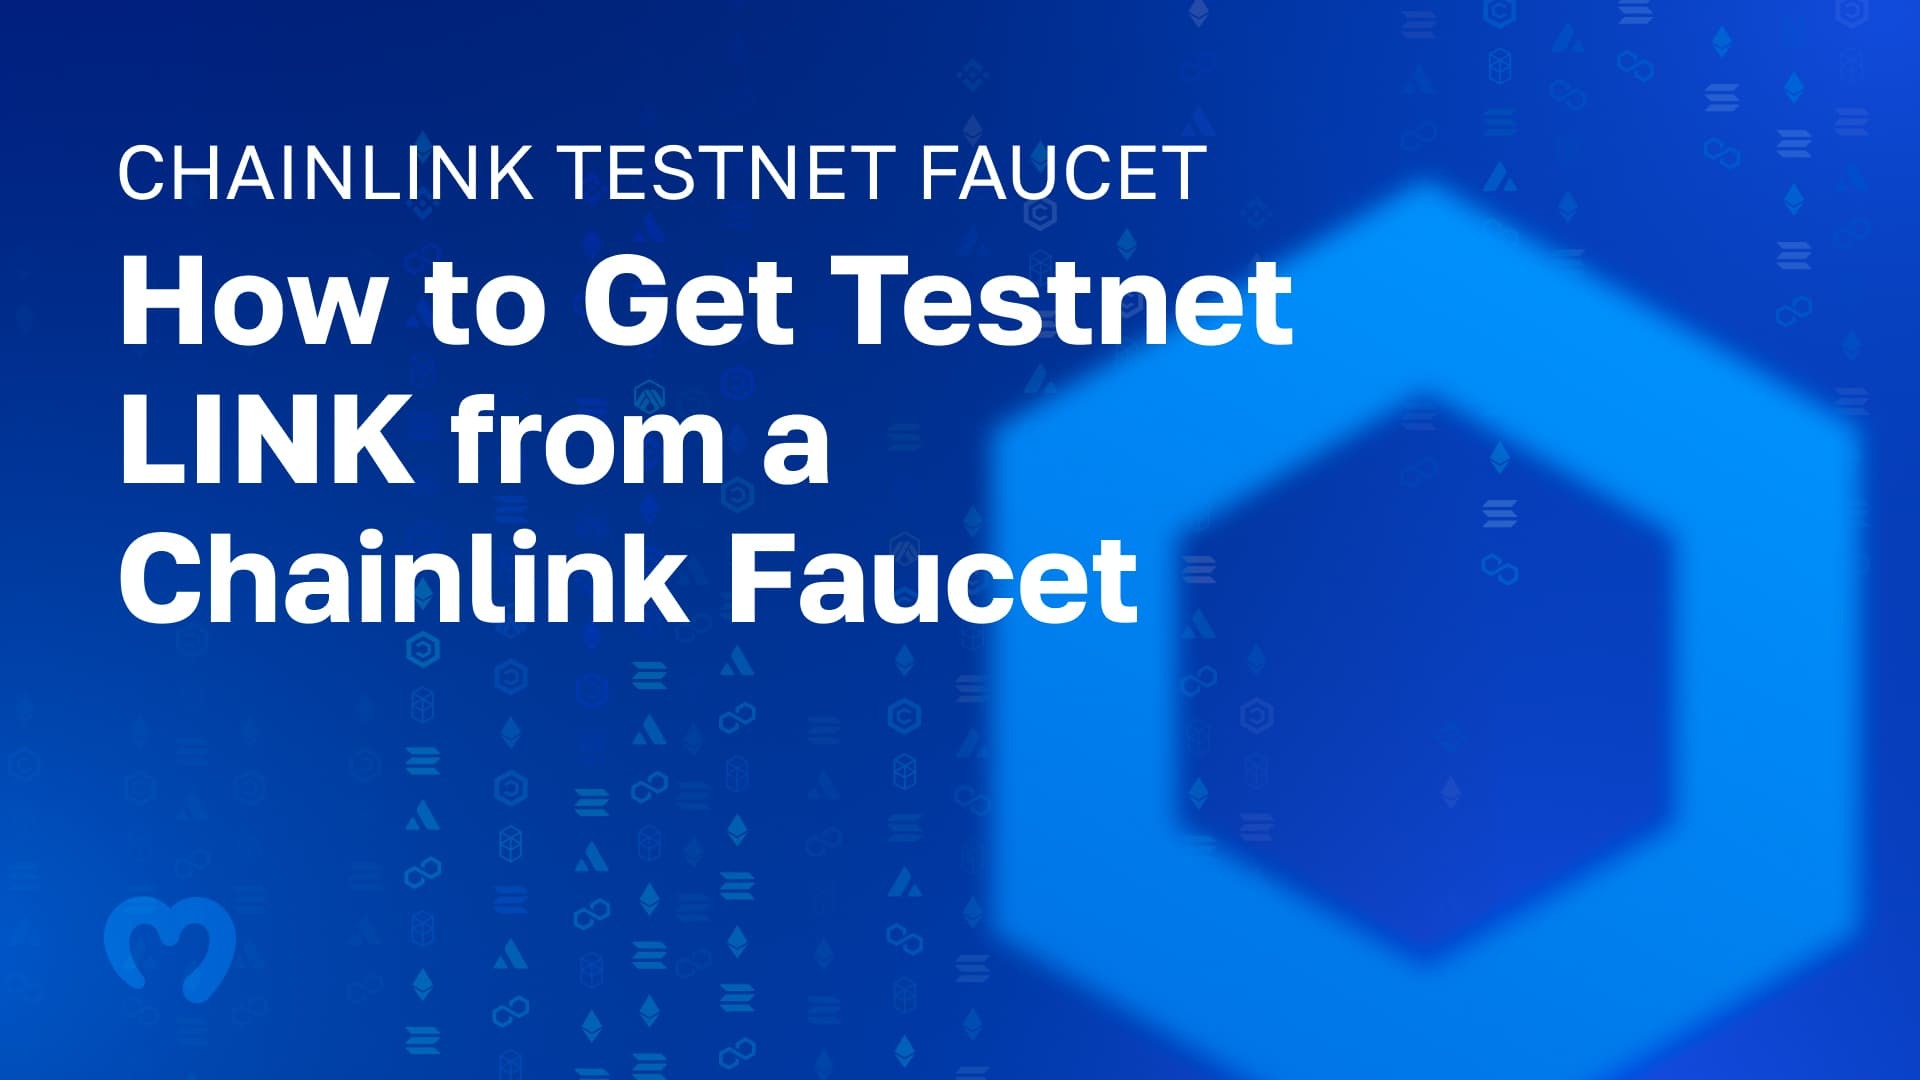 Chainlink Testnet Faucet - How to Get Testnet LINK from a Chainlink Faucet